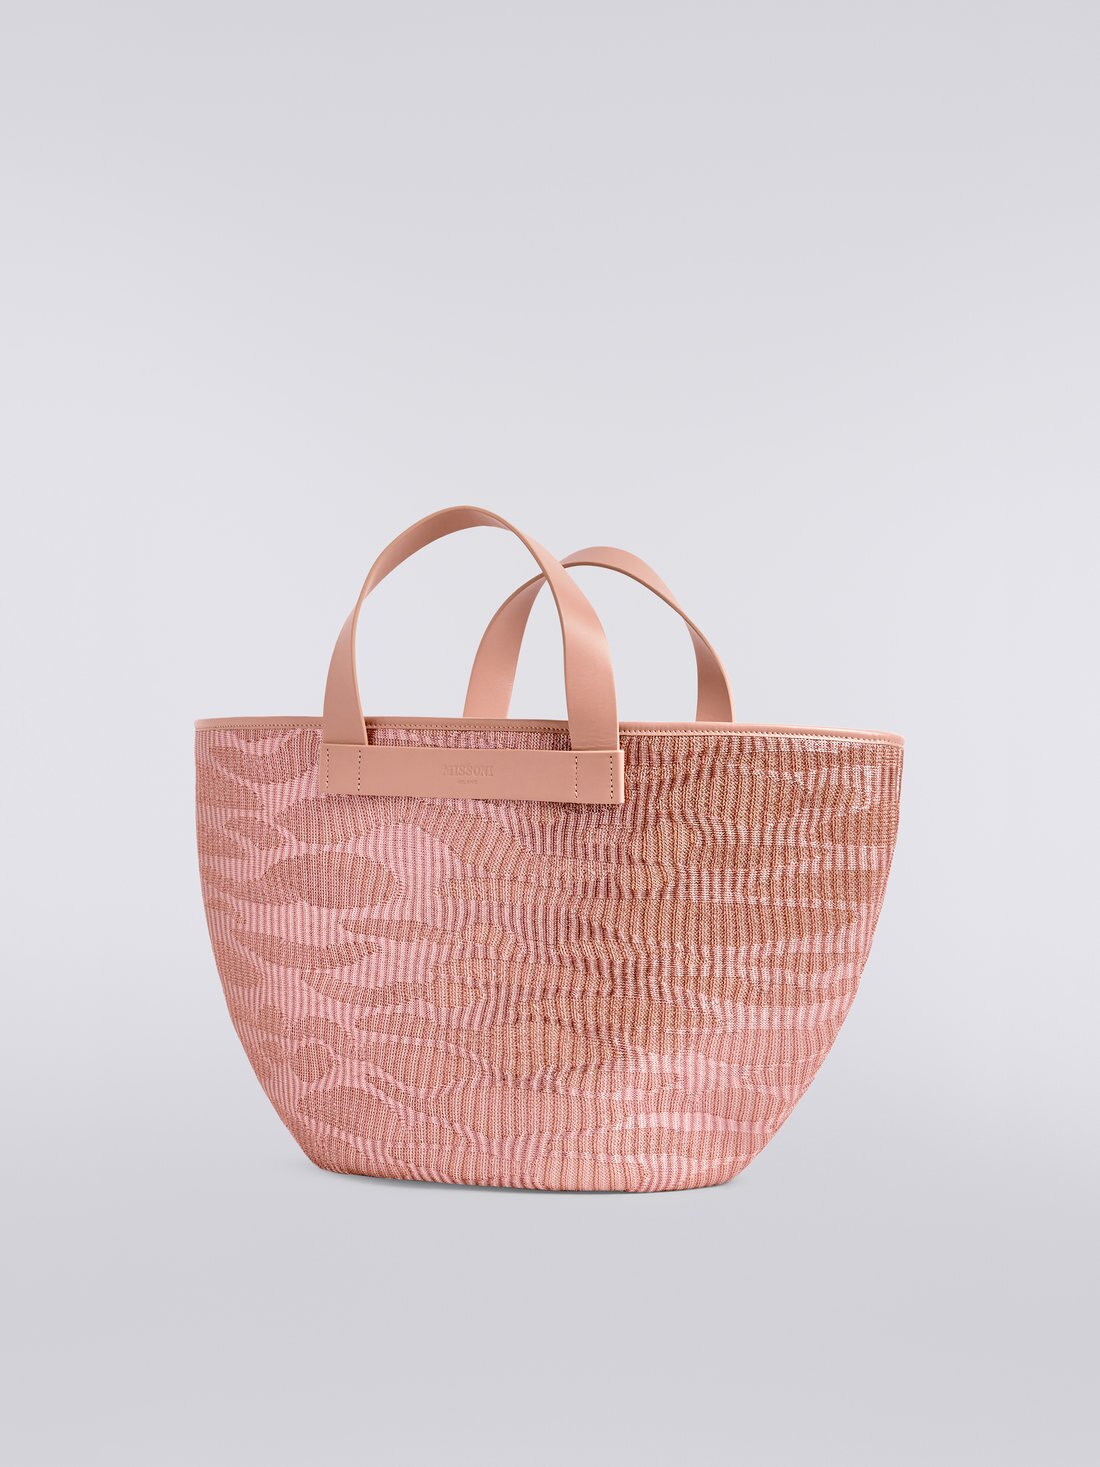 Jacquard viscose knit tote with leather handles, Pink - 8051575966170 - 1